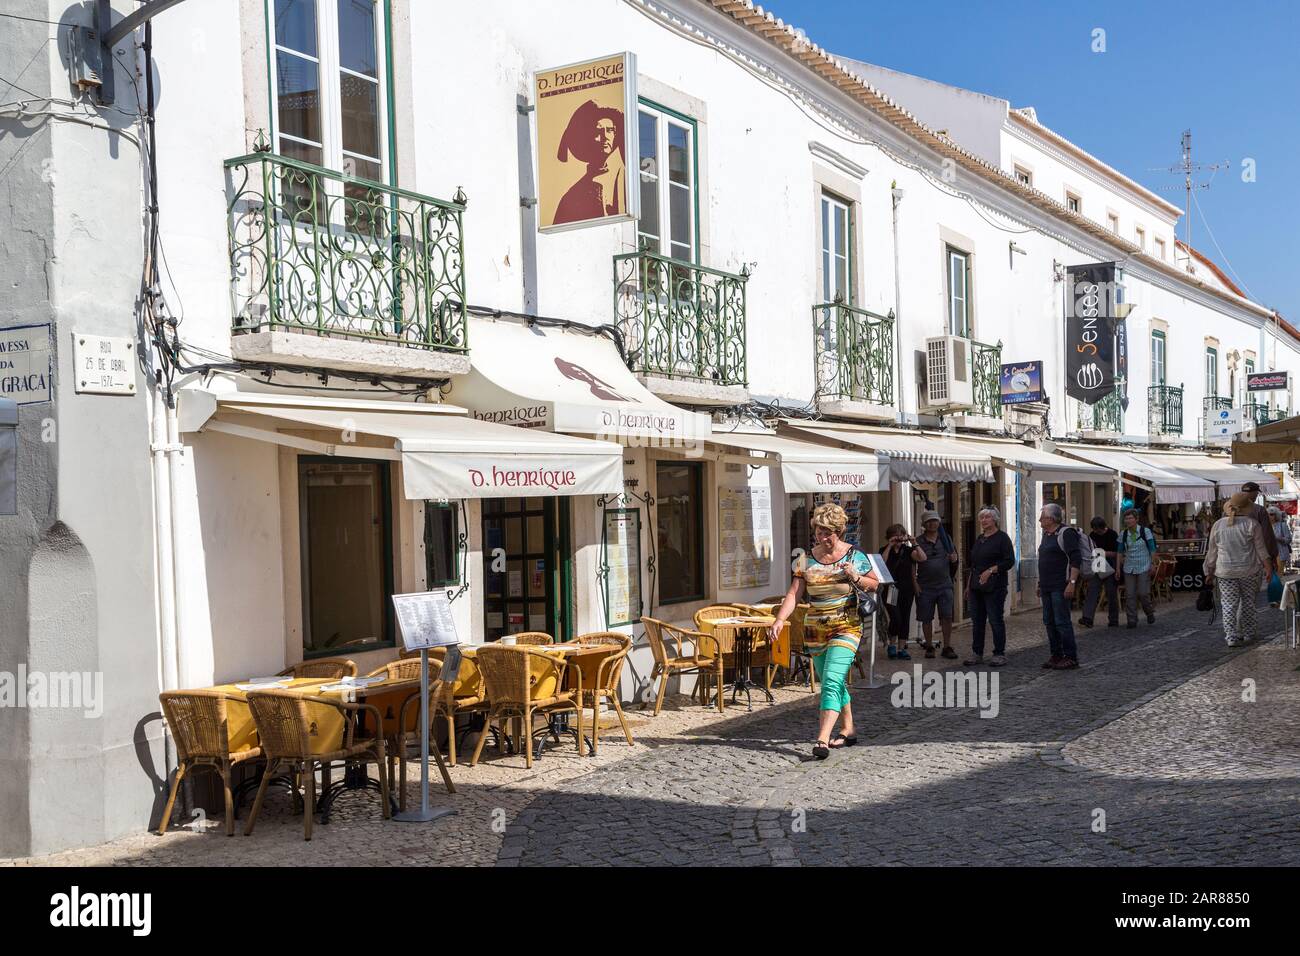 Shopping street with tables and chairs outside restaurant, Lagos, Algarve, Portugal Stock Photo